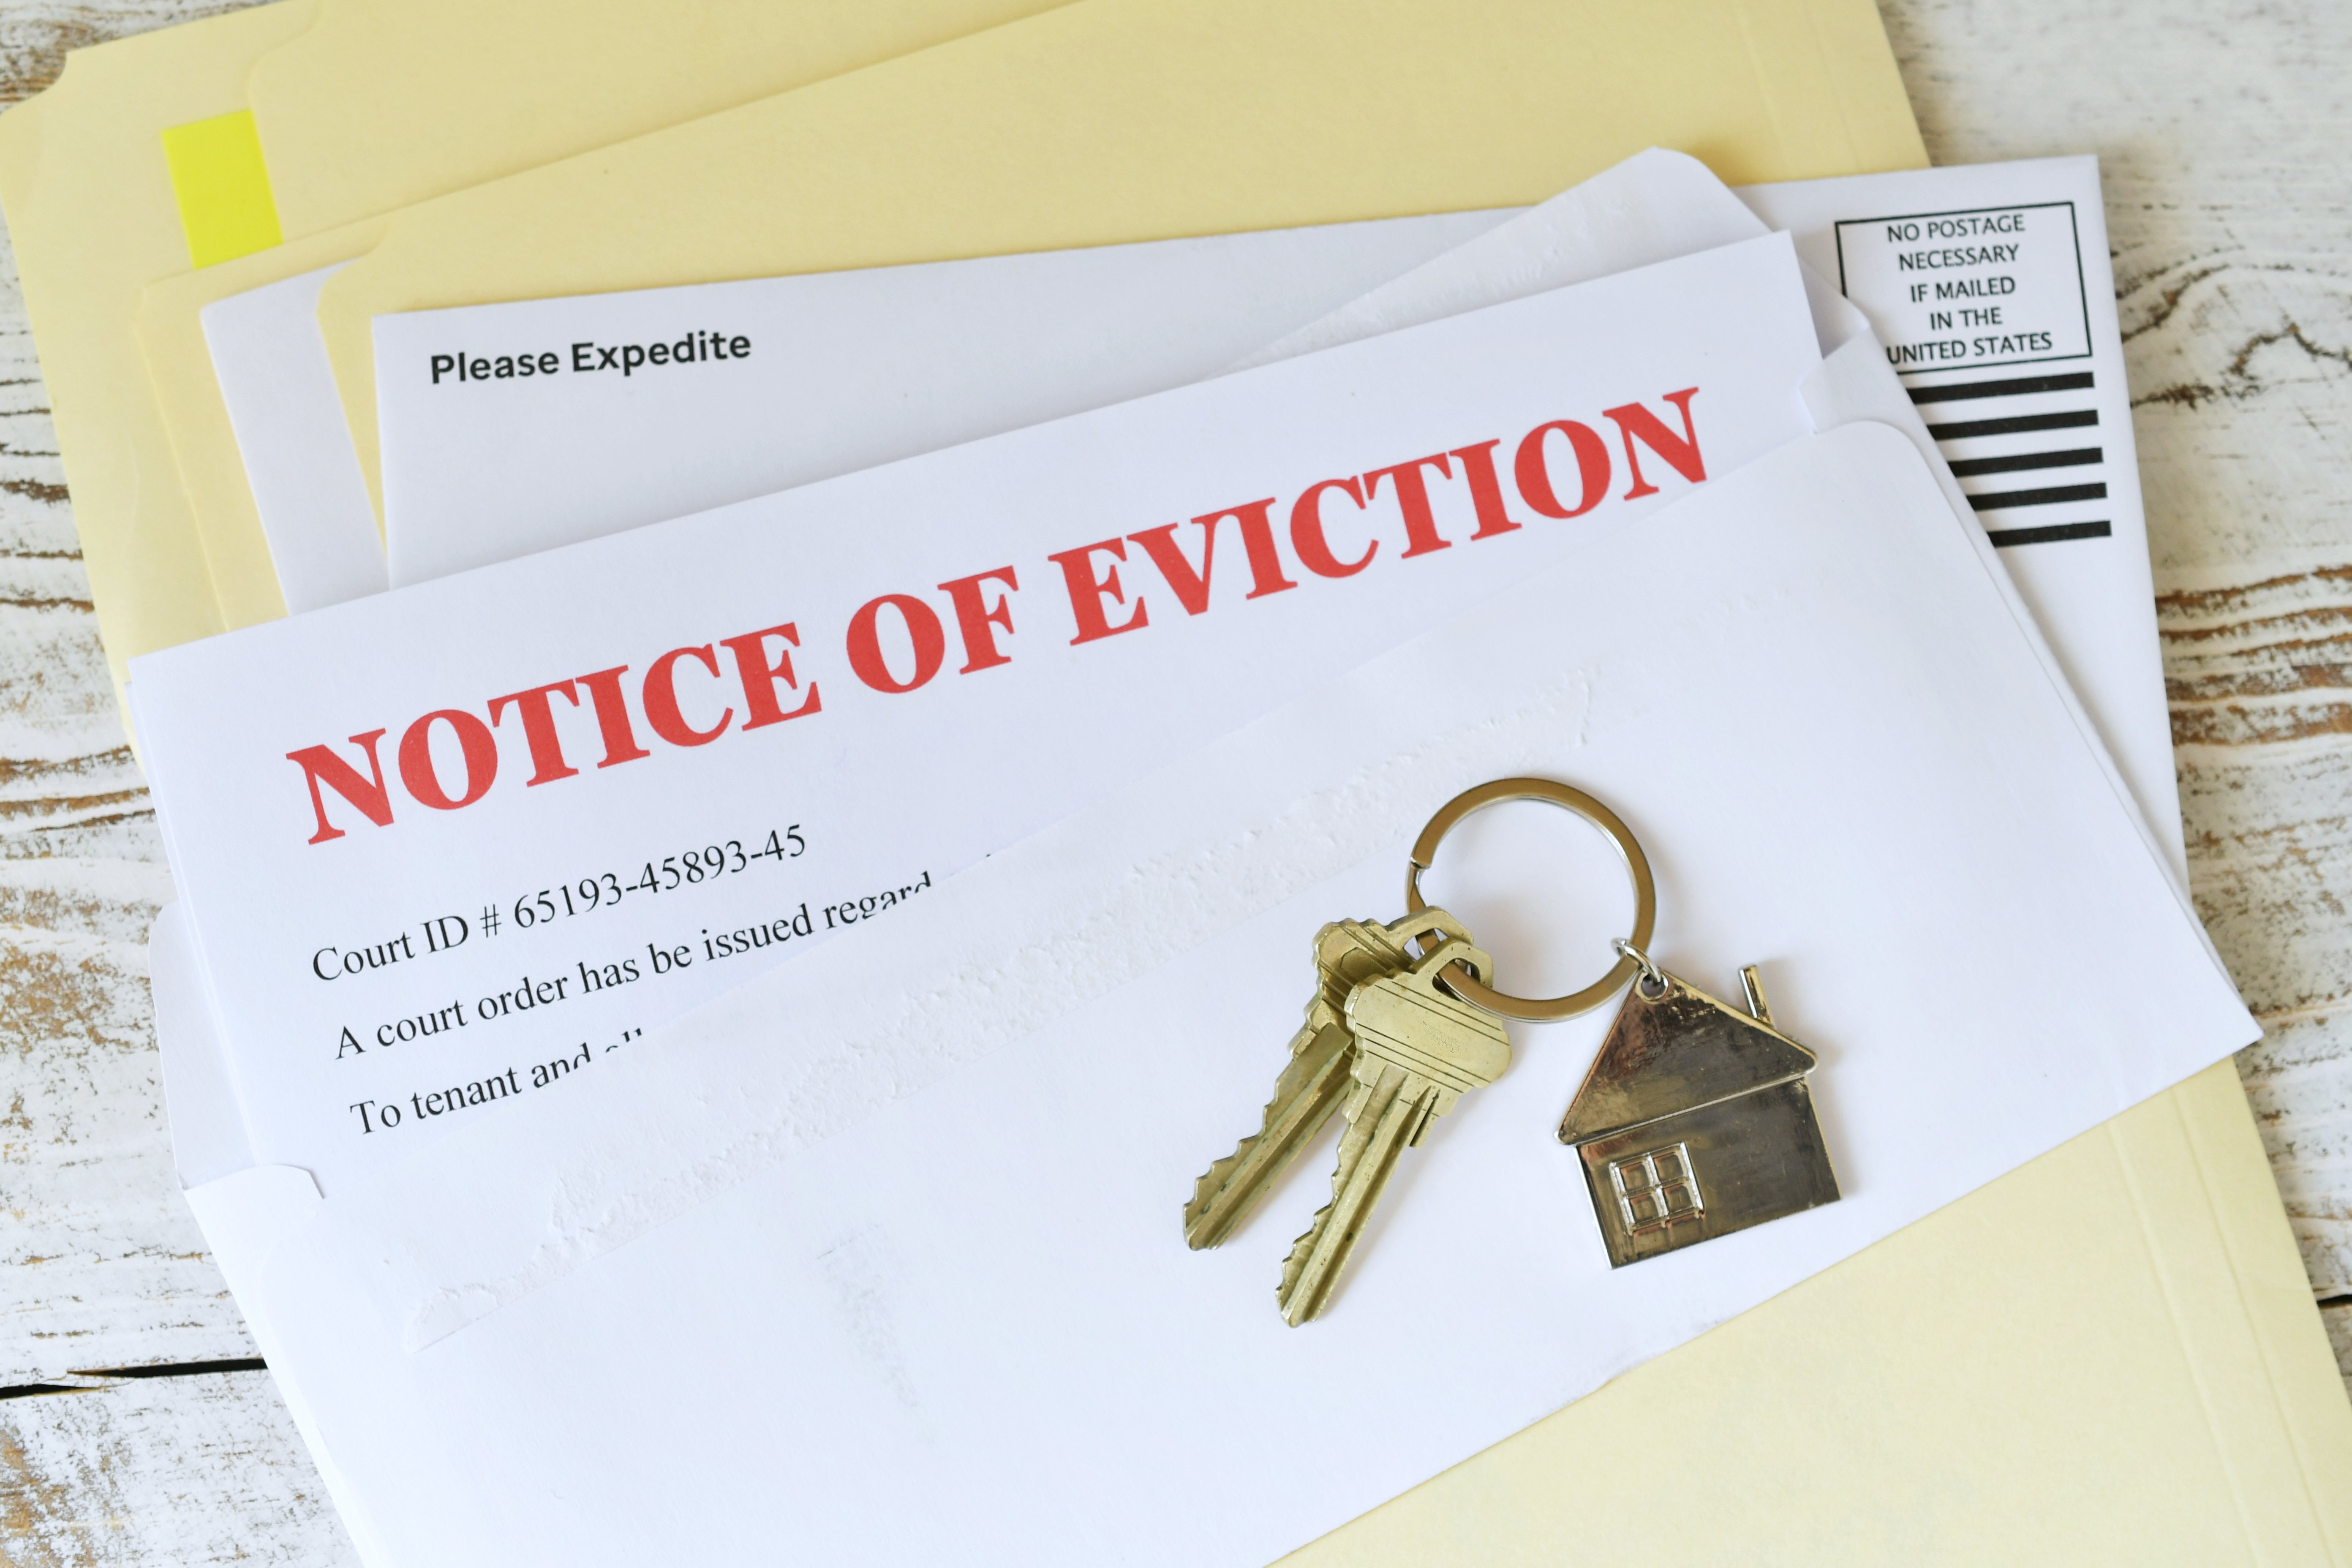 notice-of-eviction-court-papers-informing-tenant-2022-11-14-10-42-56-utc